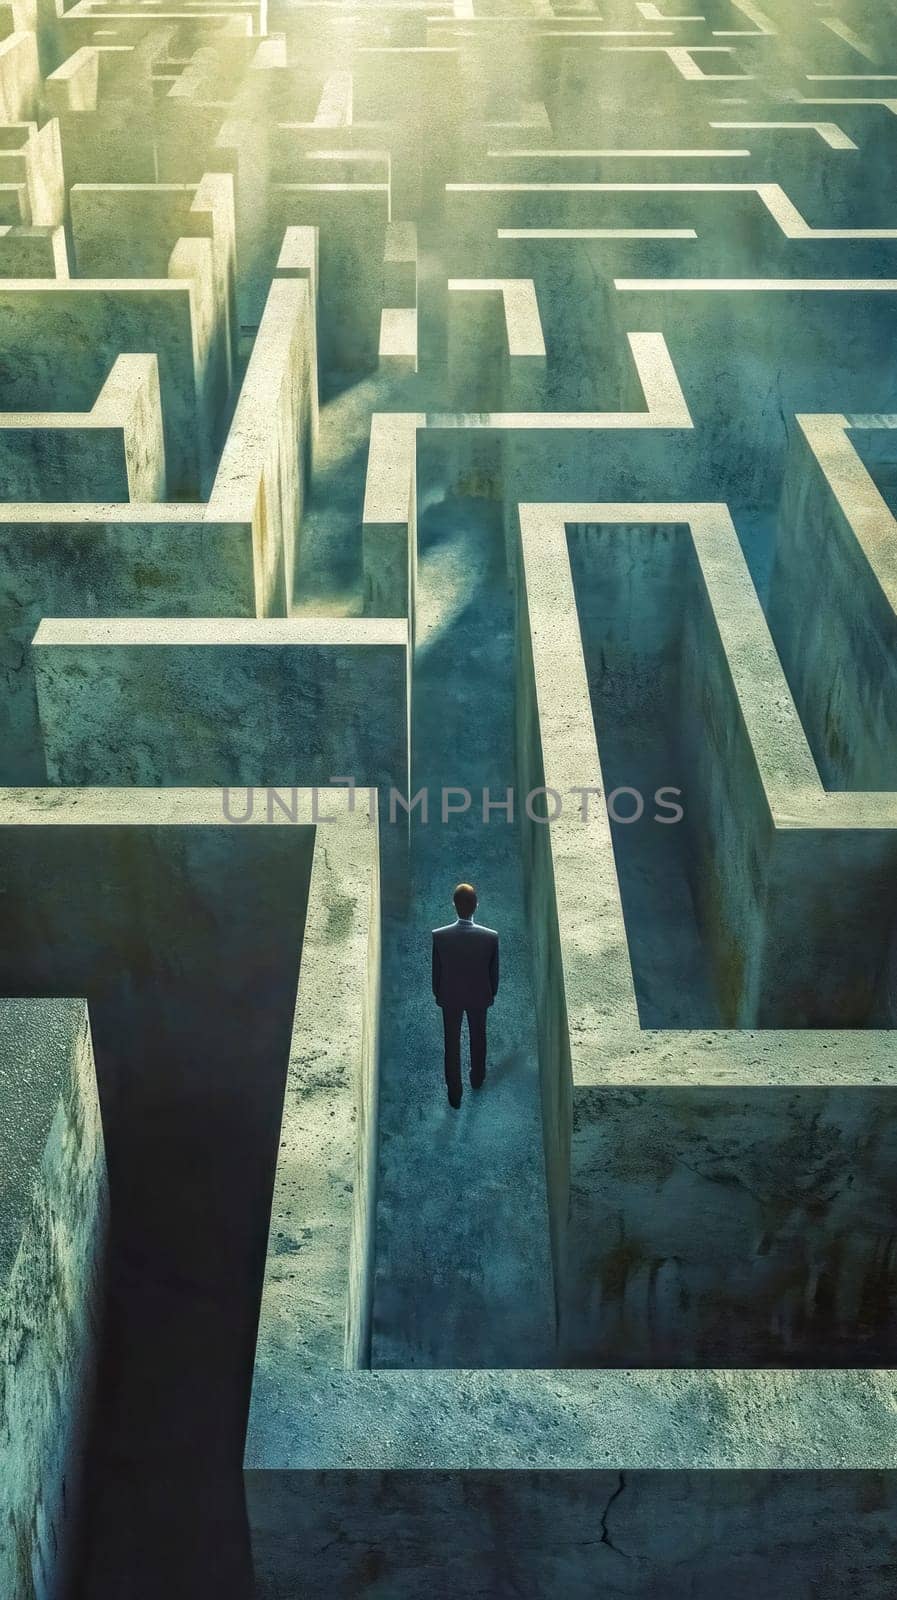 A solitary man in a suit stands at a crossroads within an immense concrete maze, contemplating the path ahead under a bright sky, vertical